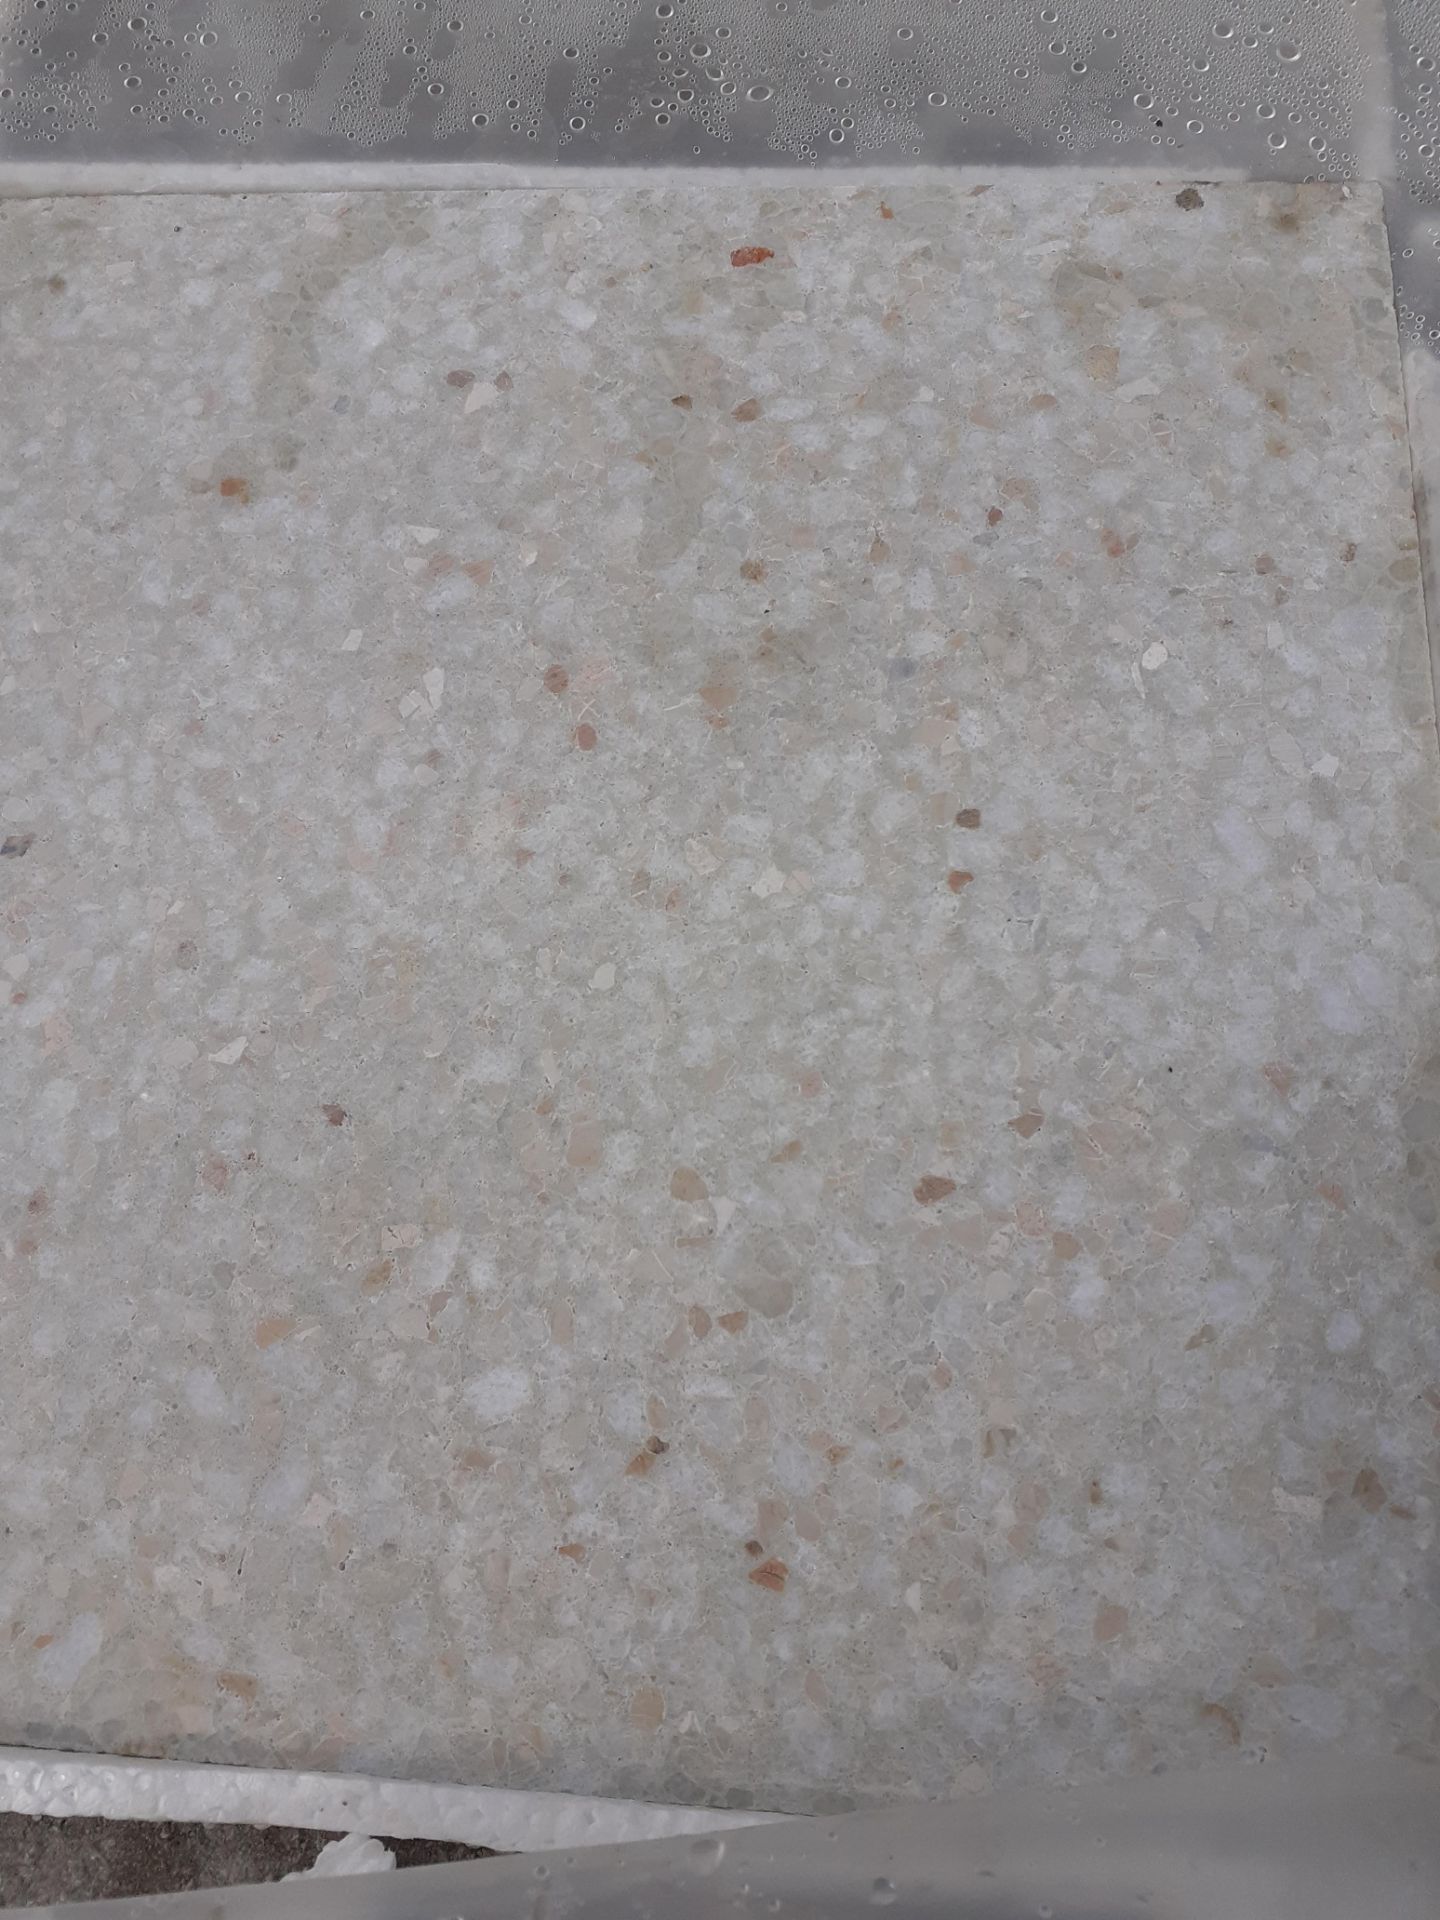 1 PALLET OF BRAND NEW TERRAZZO COMMERCIAL FLOOR TILES (Z30011), COVERS 24 SQUARE YARDS *PLUS VAT* - Image 14 of 15